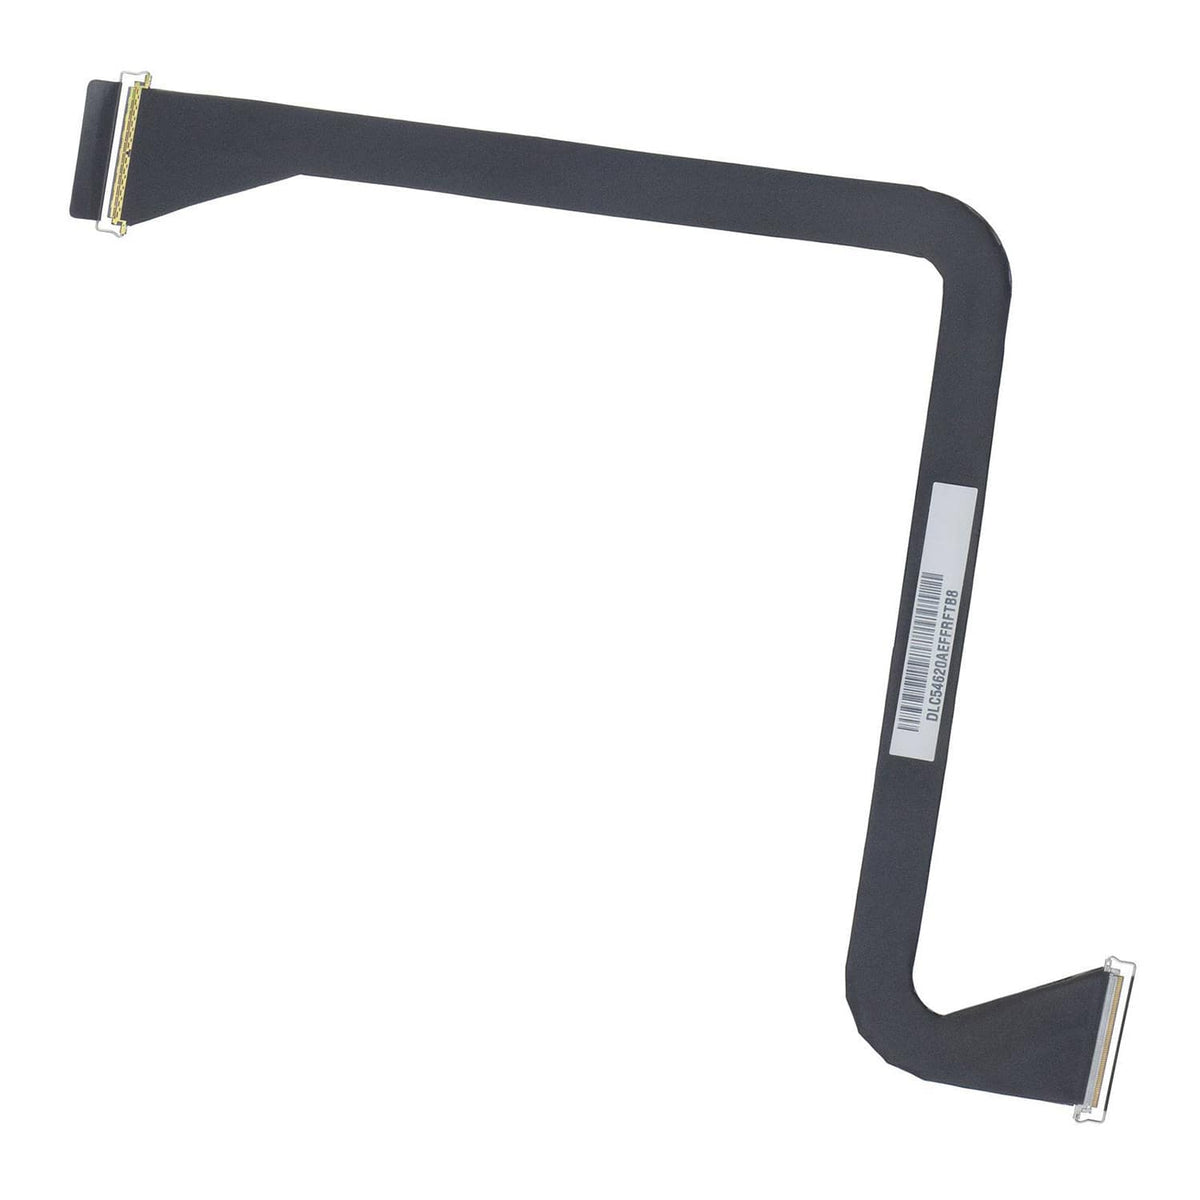 LCD DISPLAY EDP CABLE FOR IMAC 27" A1419 (LATE 2014,MID 2015)